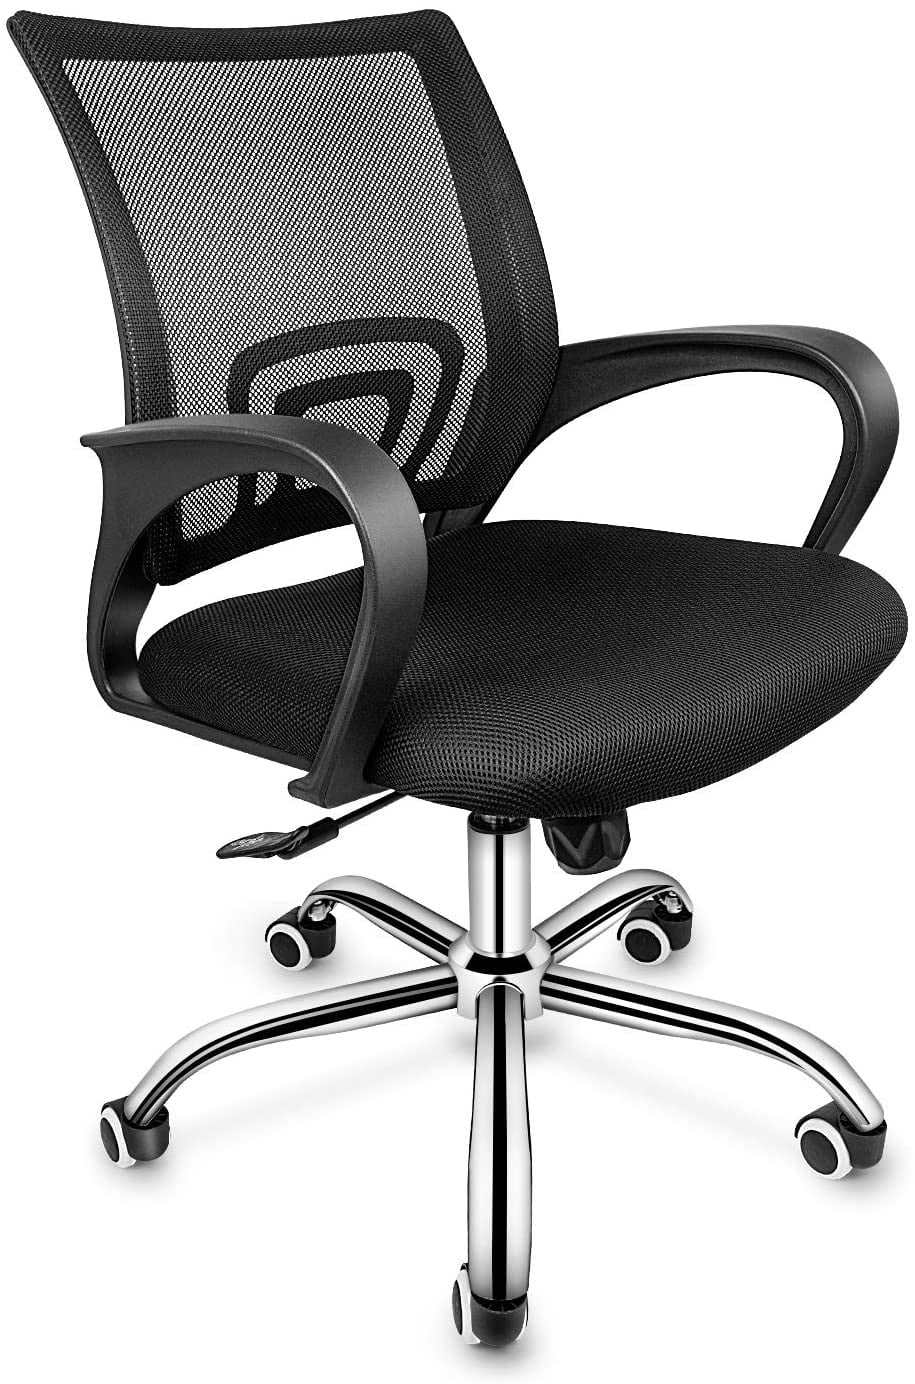 Mesh Office Chair Black Computer Chair Swivel Lift Seat Height Home Low Price 